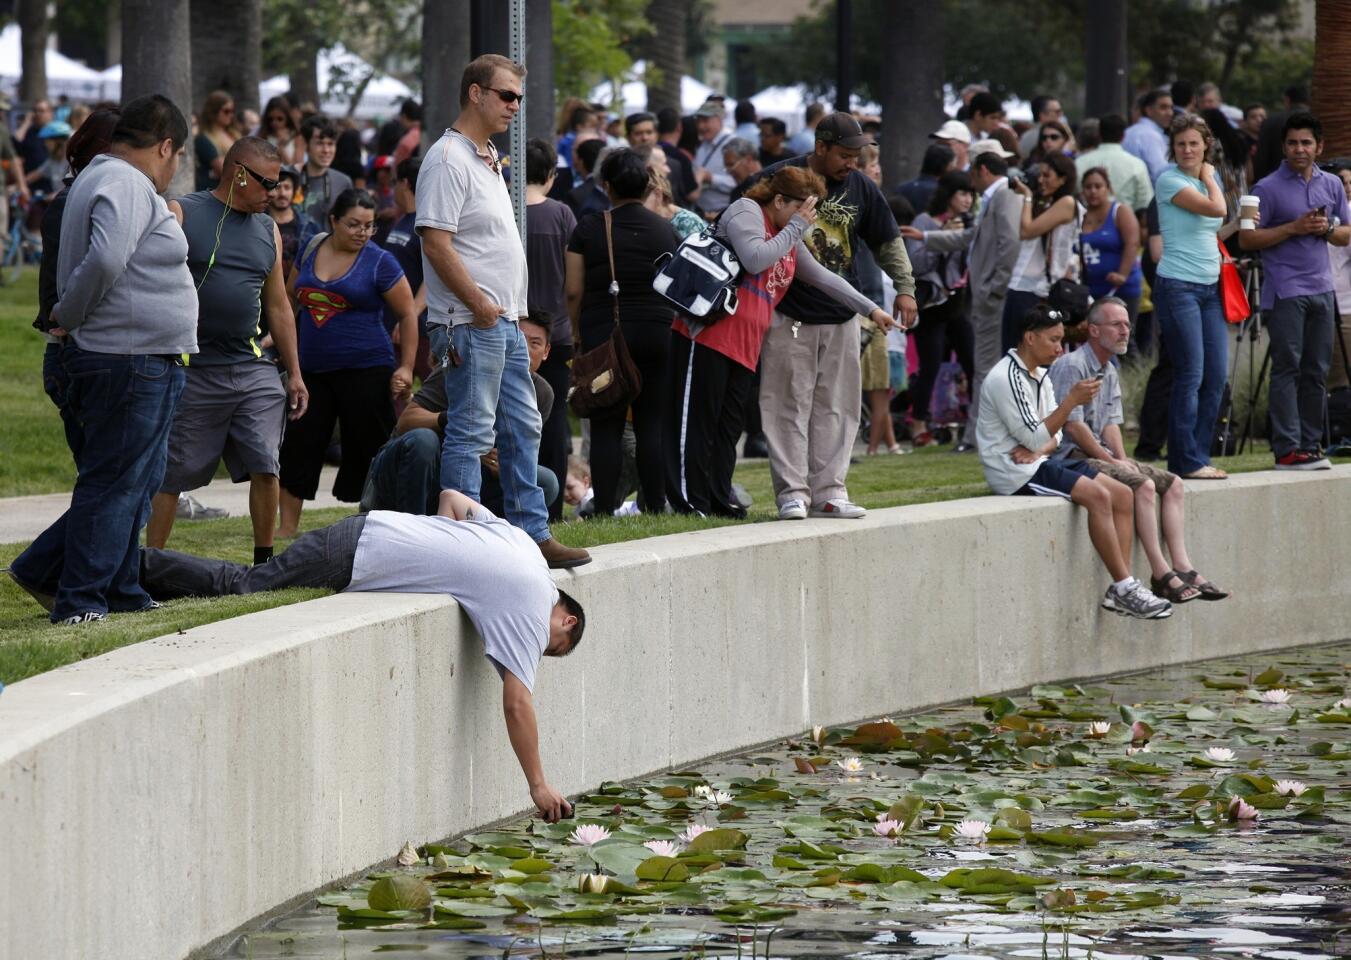 A visitor leans into the pond to get a close-up of a lotus on the opening day of newly refurbished Echo Park Lake in Los Angeles.